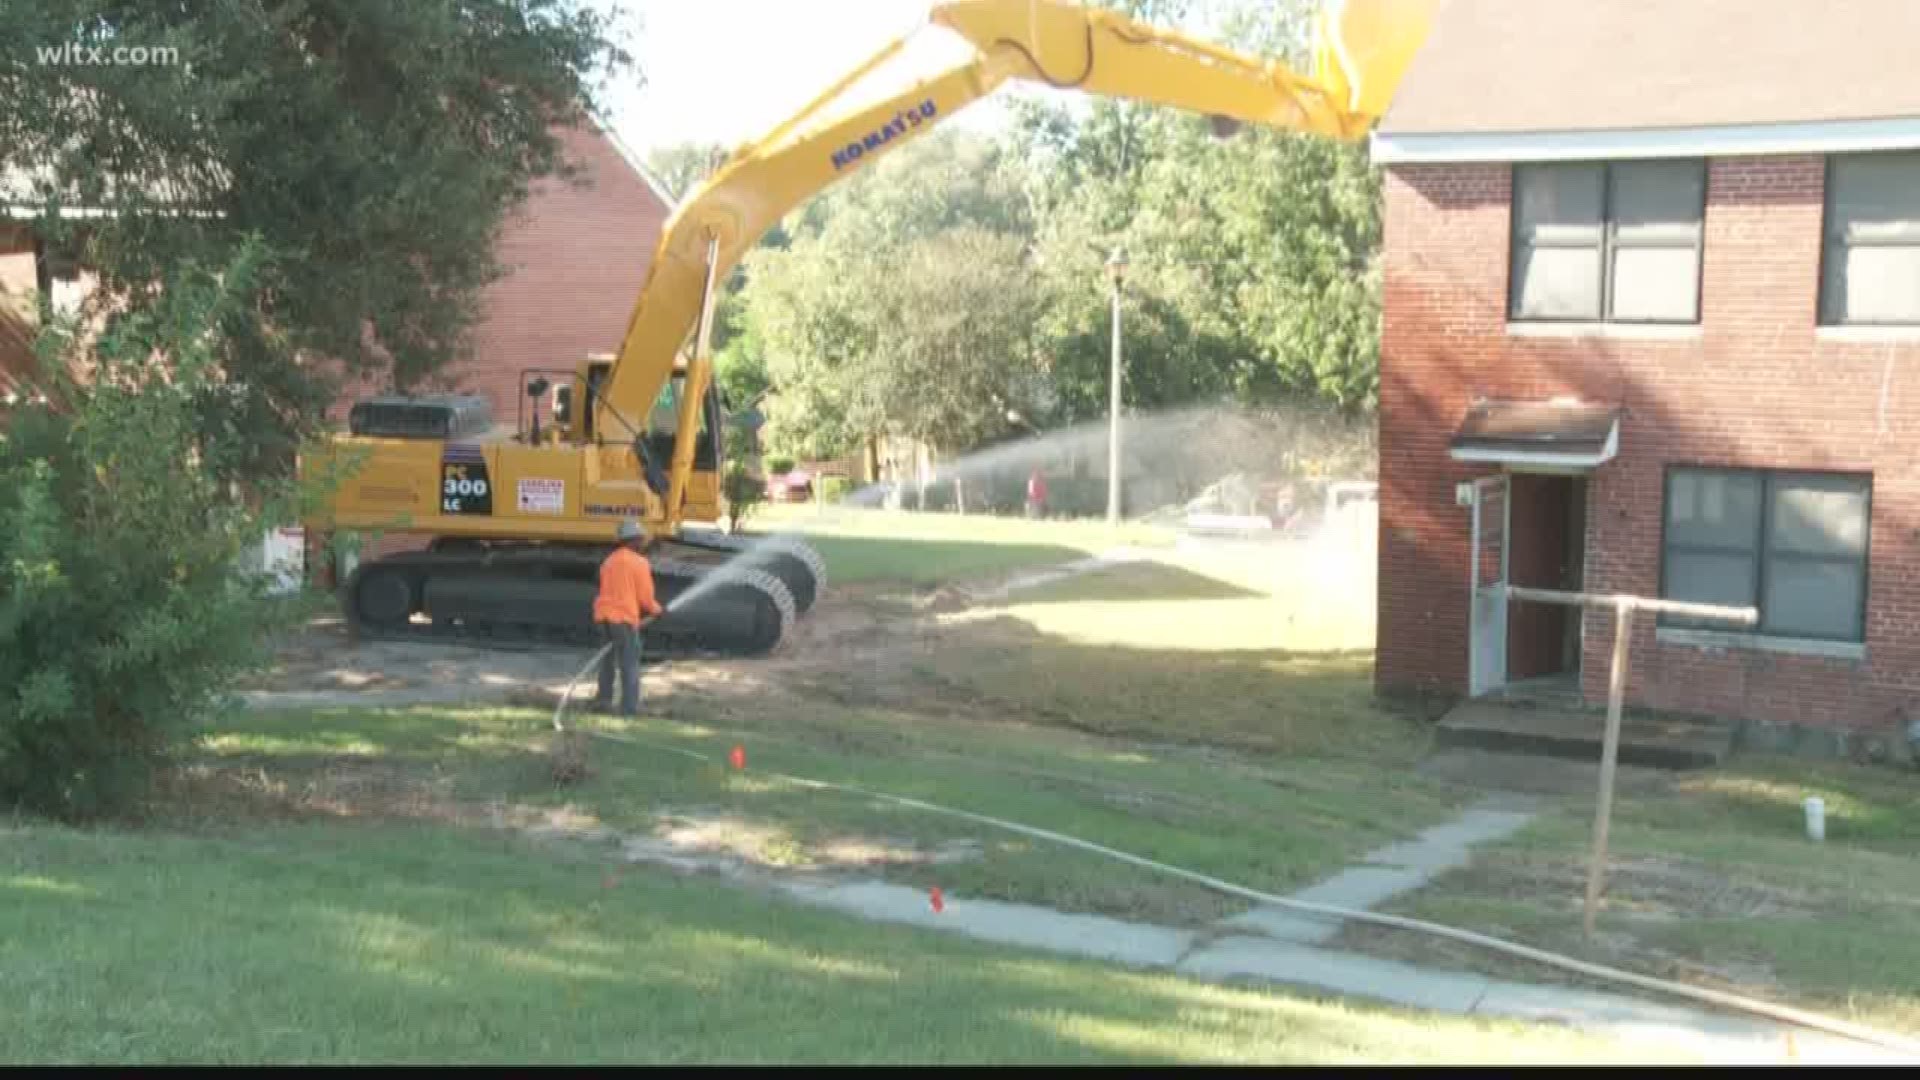 After multiple gas leaks were found in the housing complex, will it stay around?